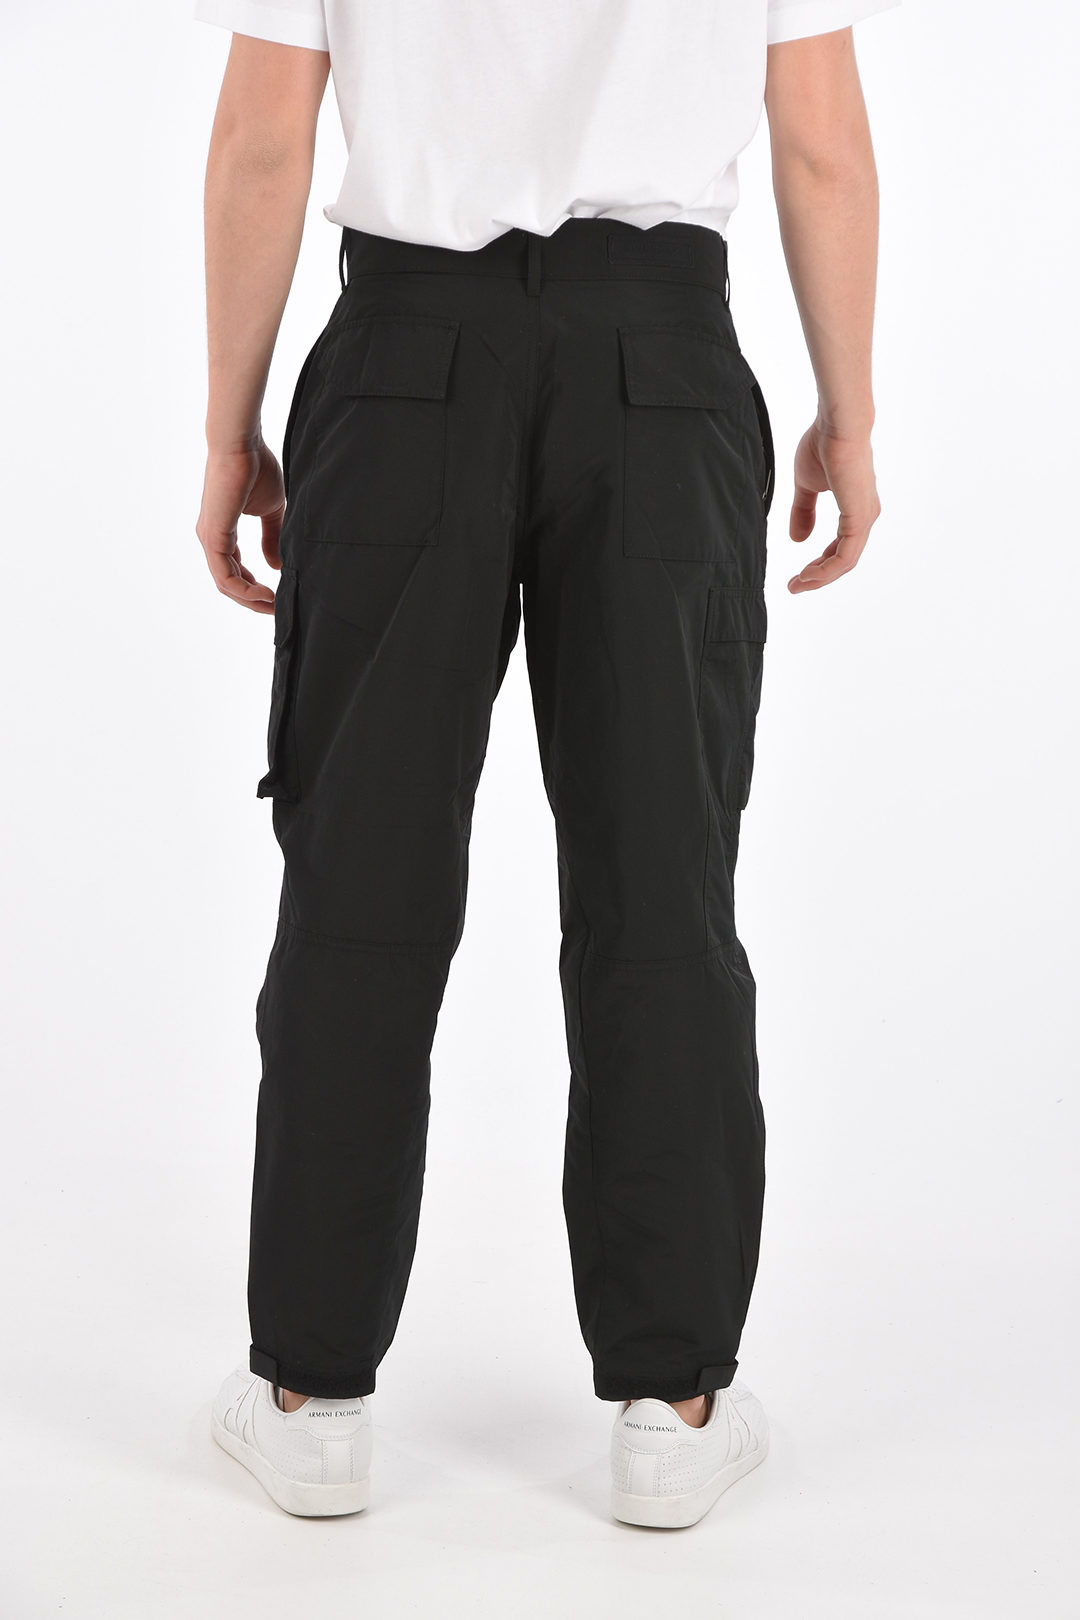 Givenchy low-crotch cargo pants men - Glamood Outlet